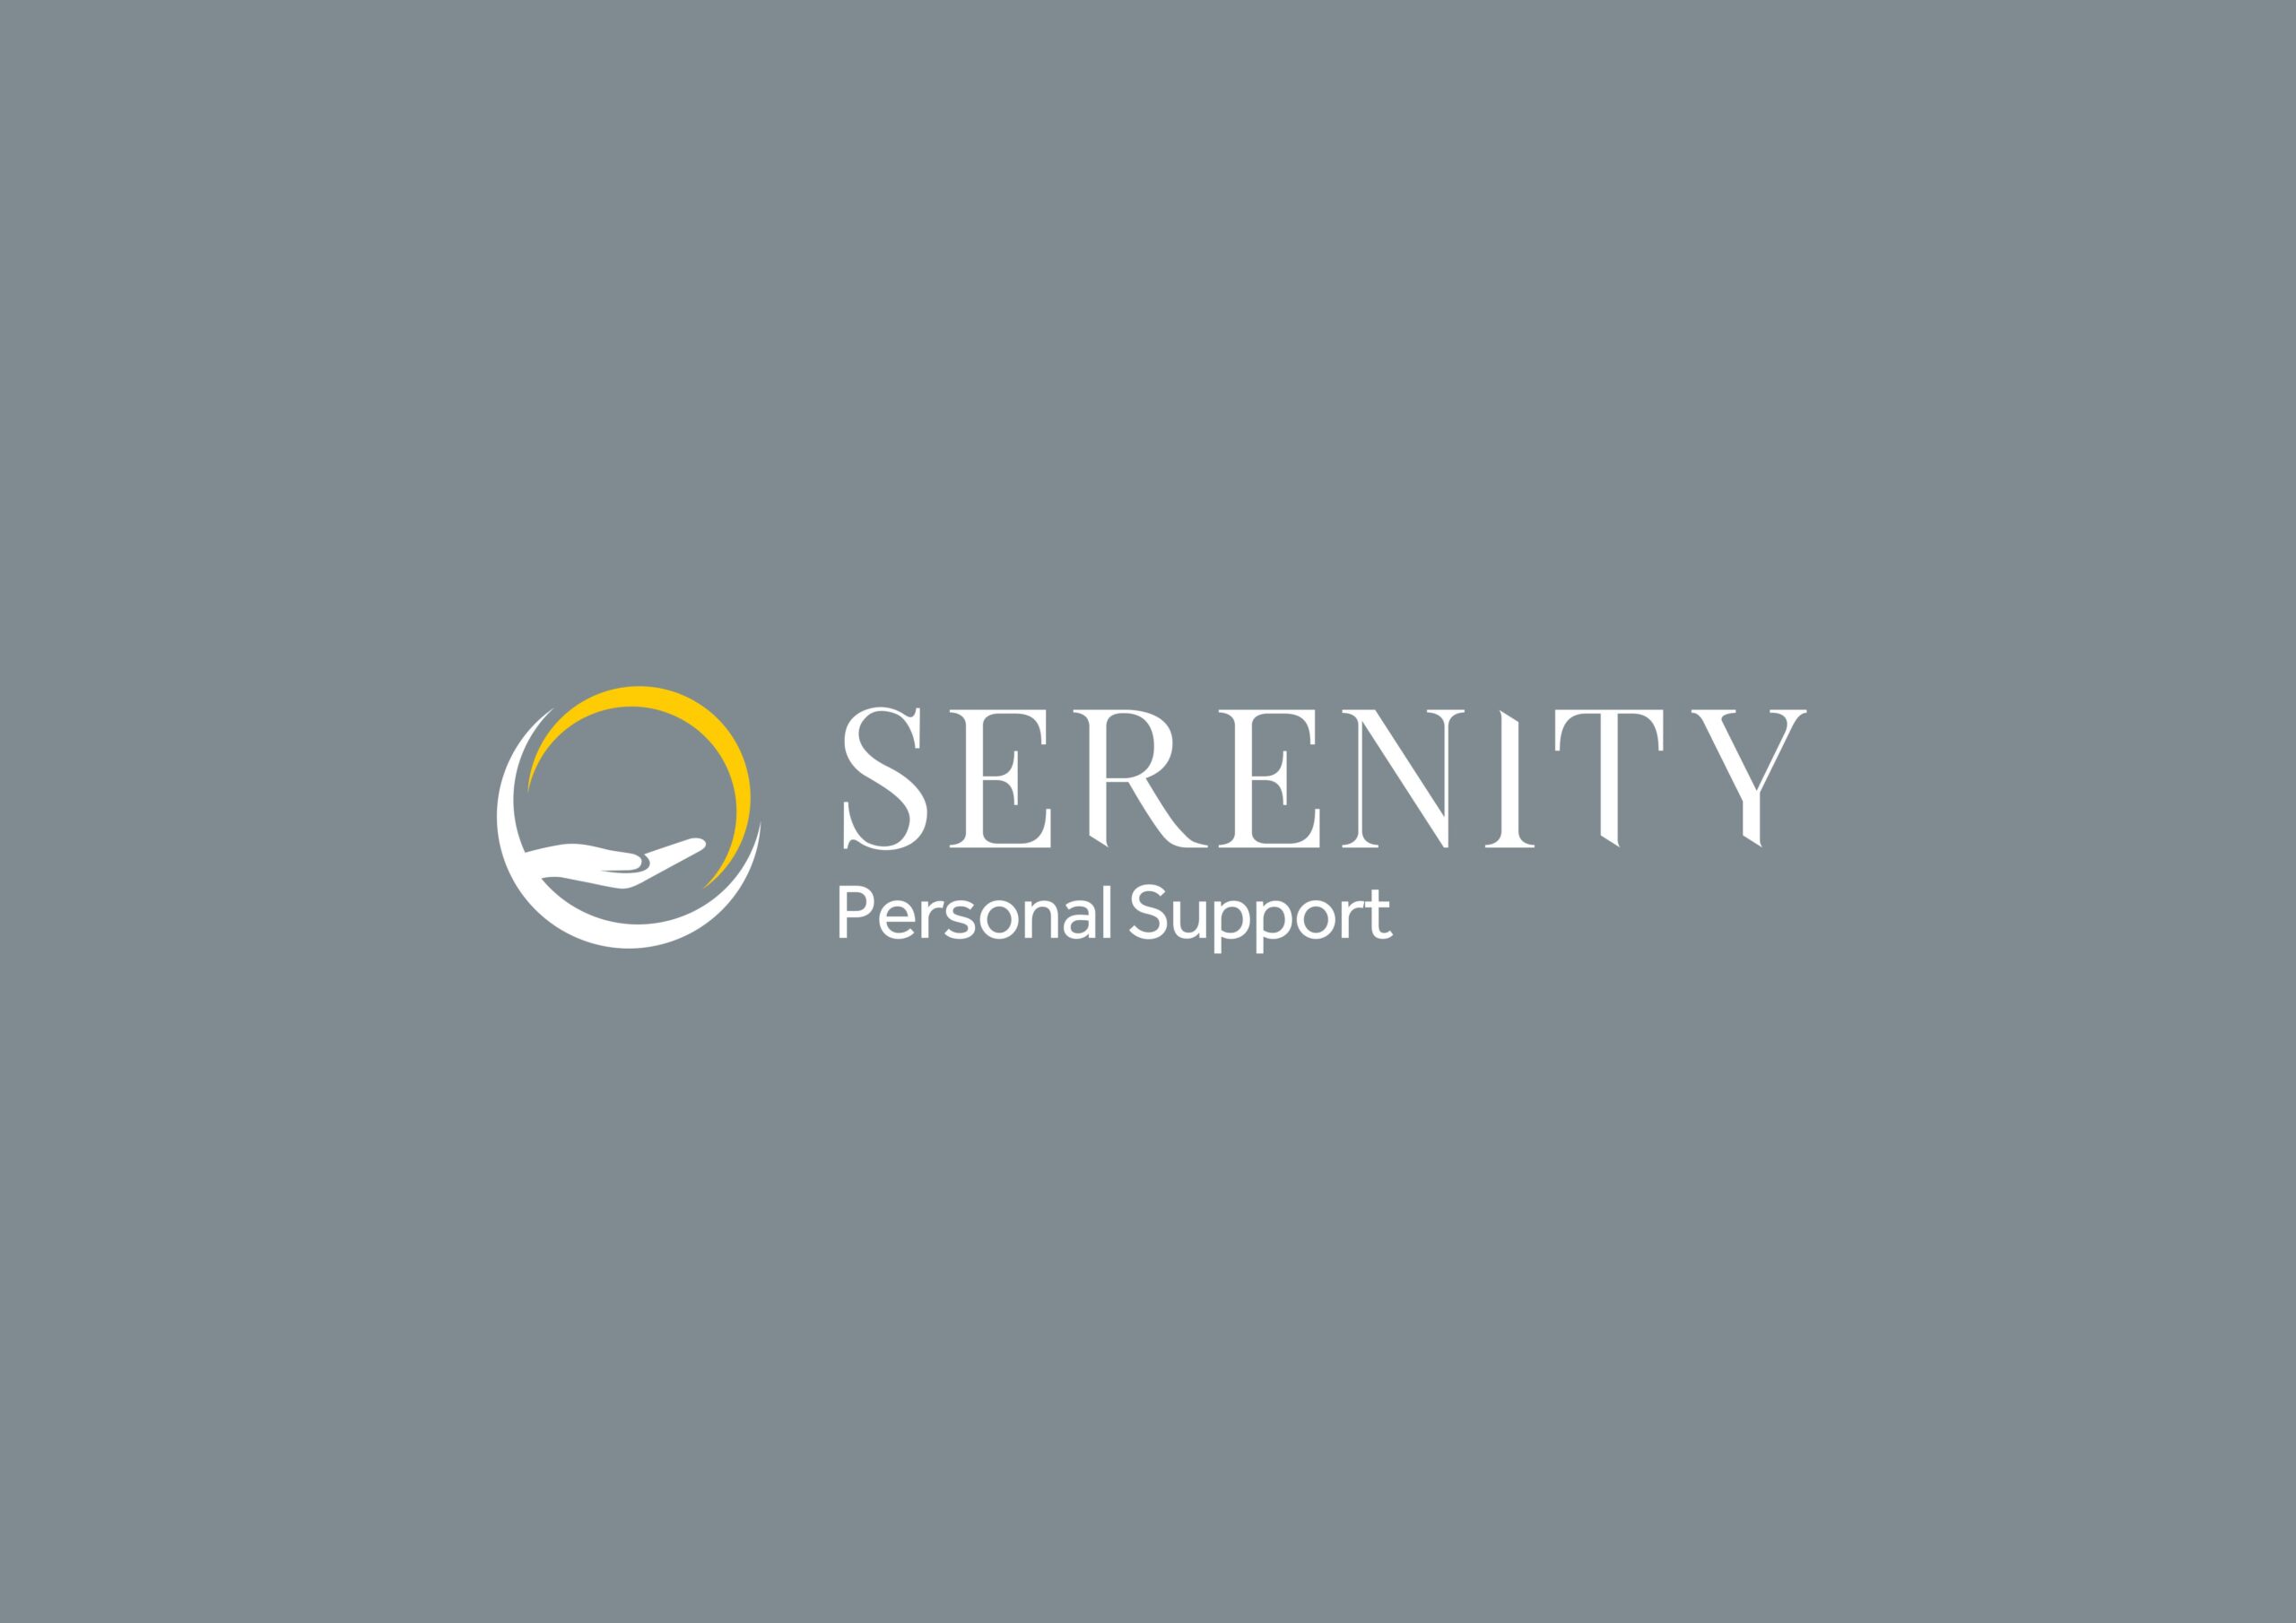 Serenity Personal Support logo